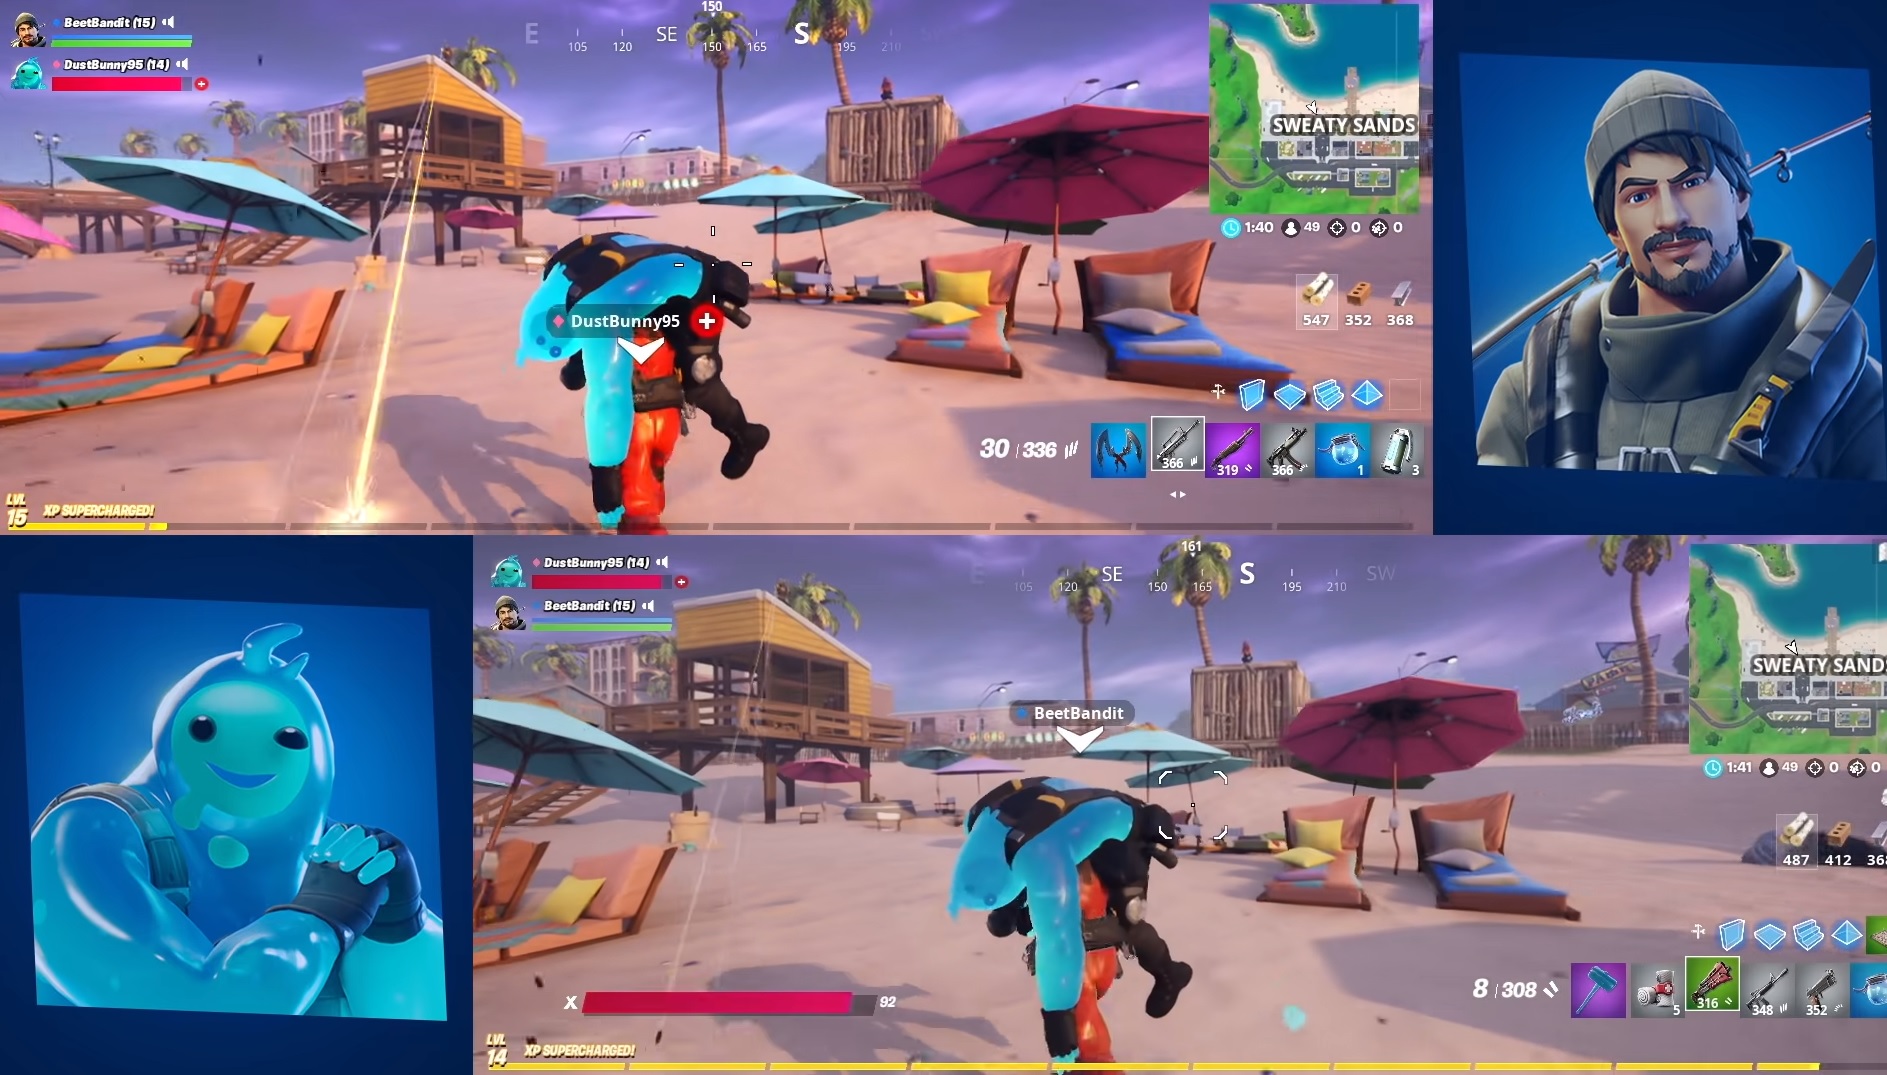 Playing Split Screen in Fortnite: A Guide to Split Screen Mode in Fortnite  - SarkariResult